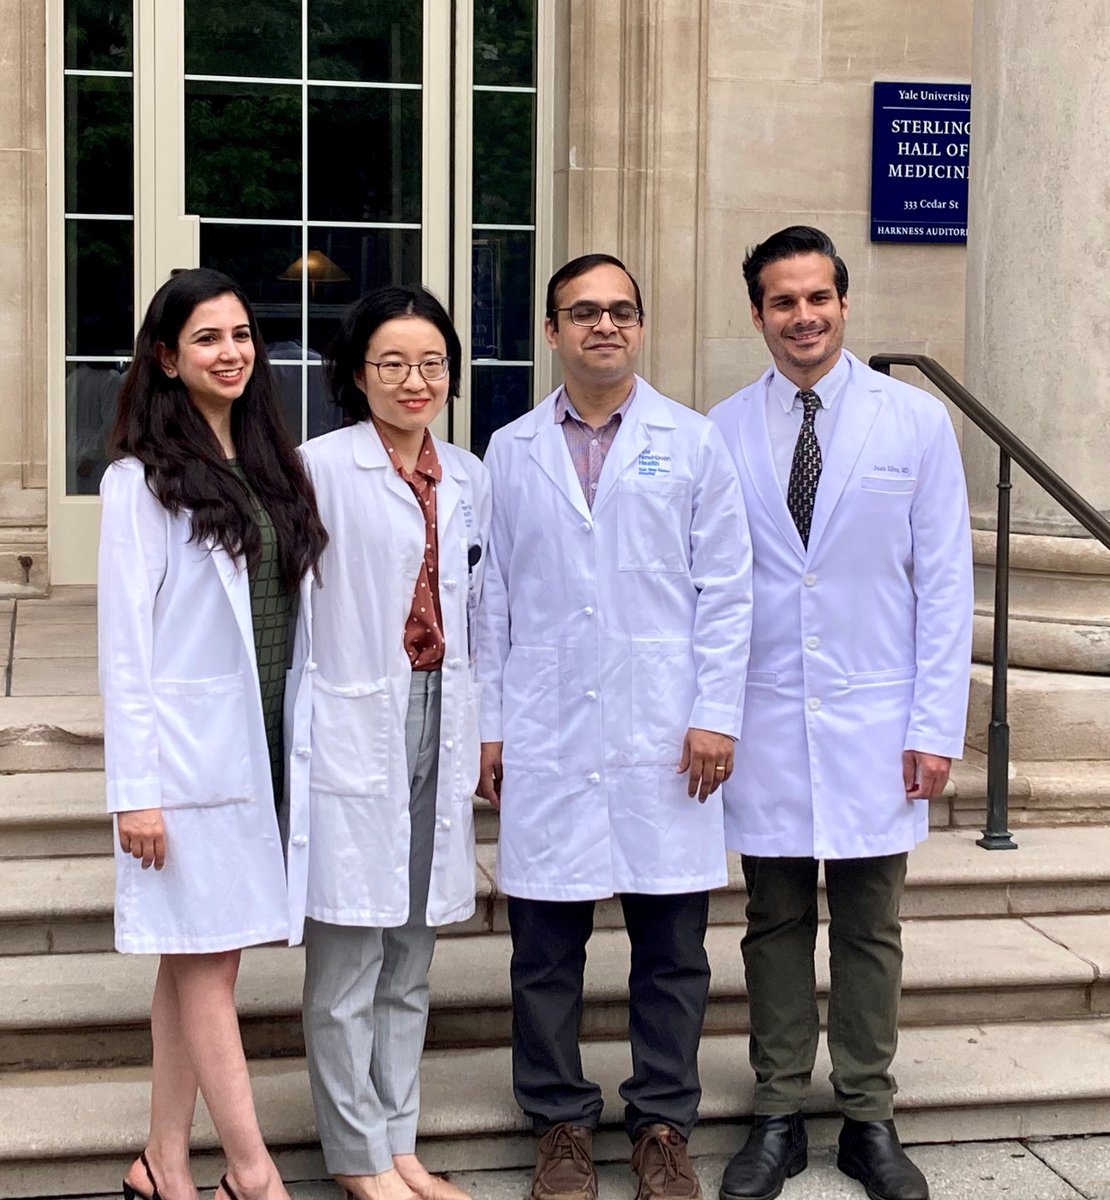 Here are a few more images from our @YalePathRes Photo Shoot today @YaleMed #Pathology